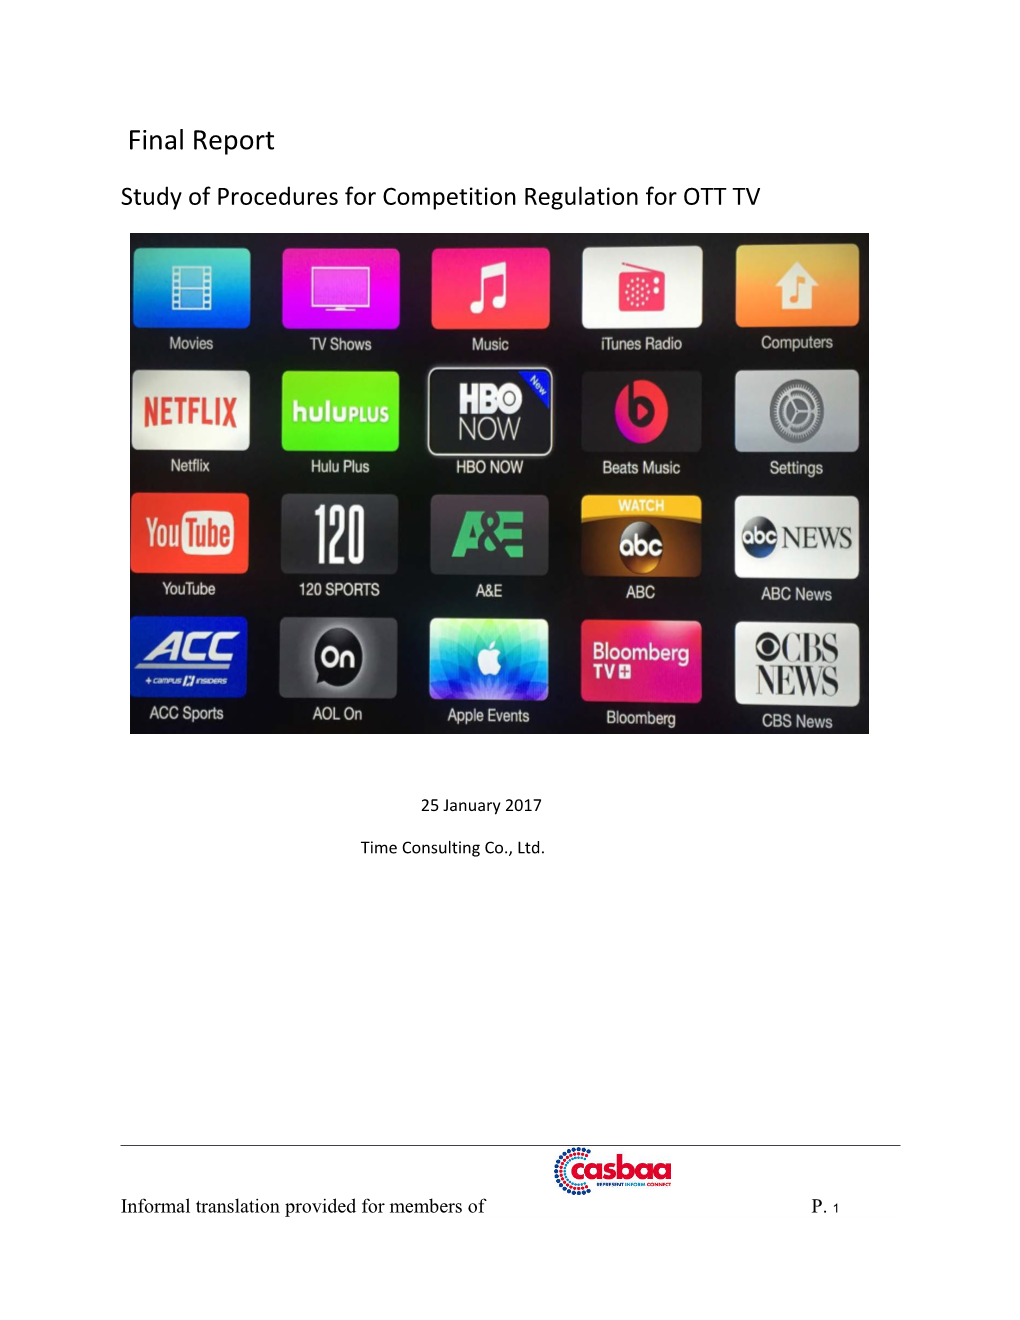 Study of Procedures for Competition Regulation for OTT TV